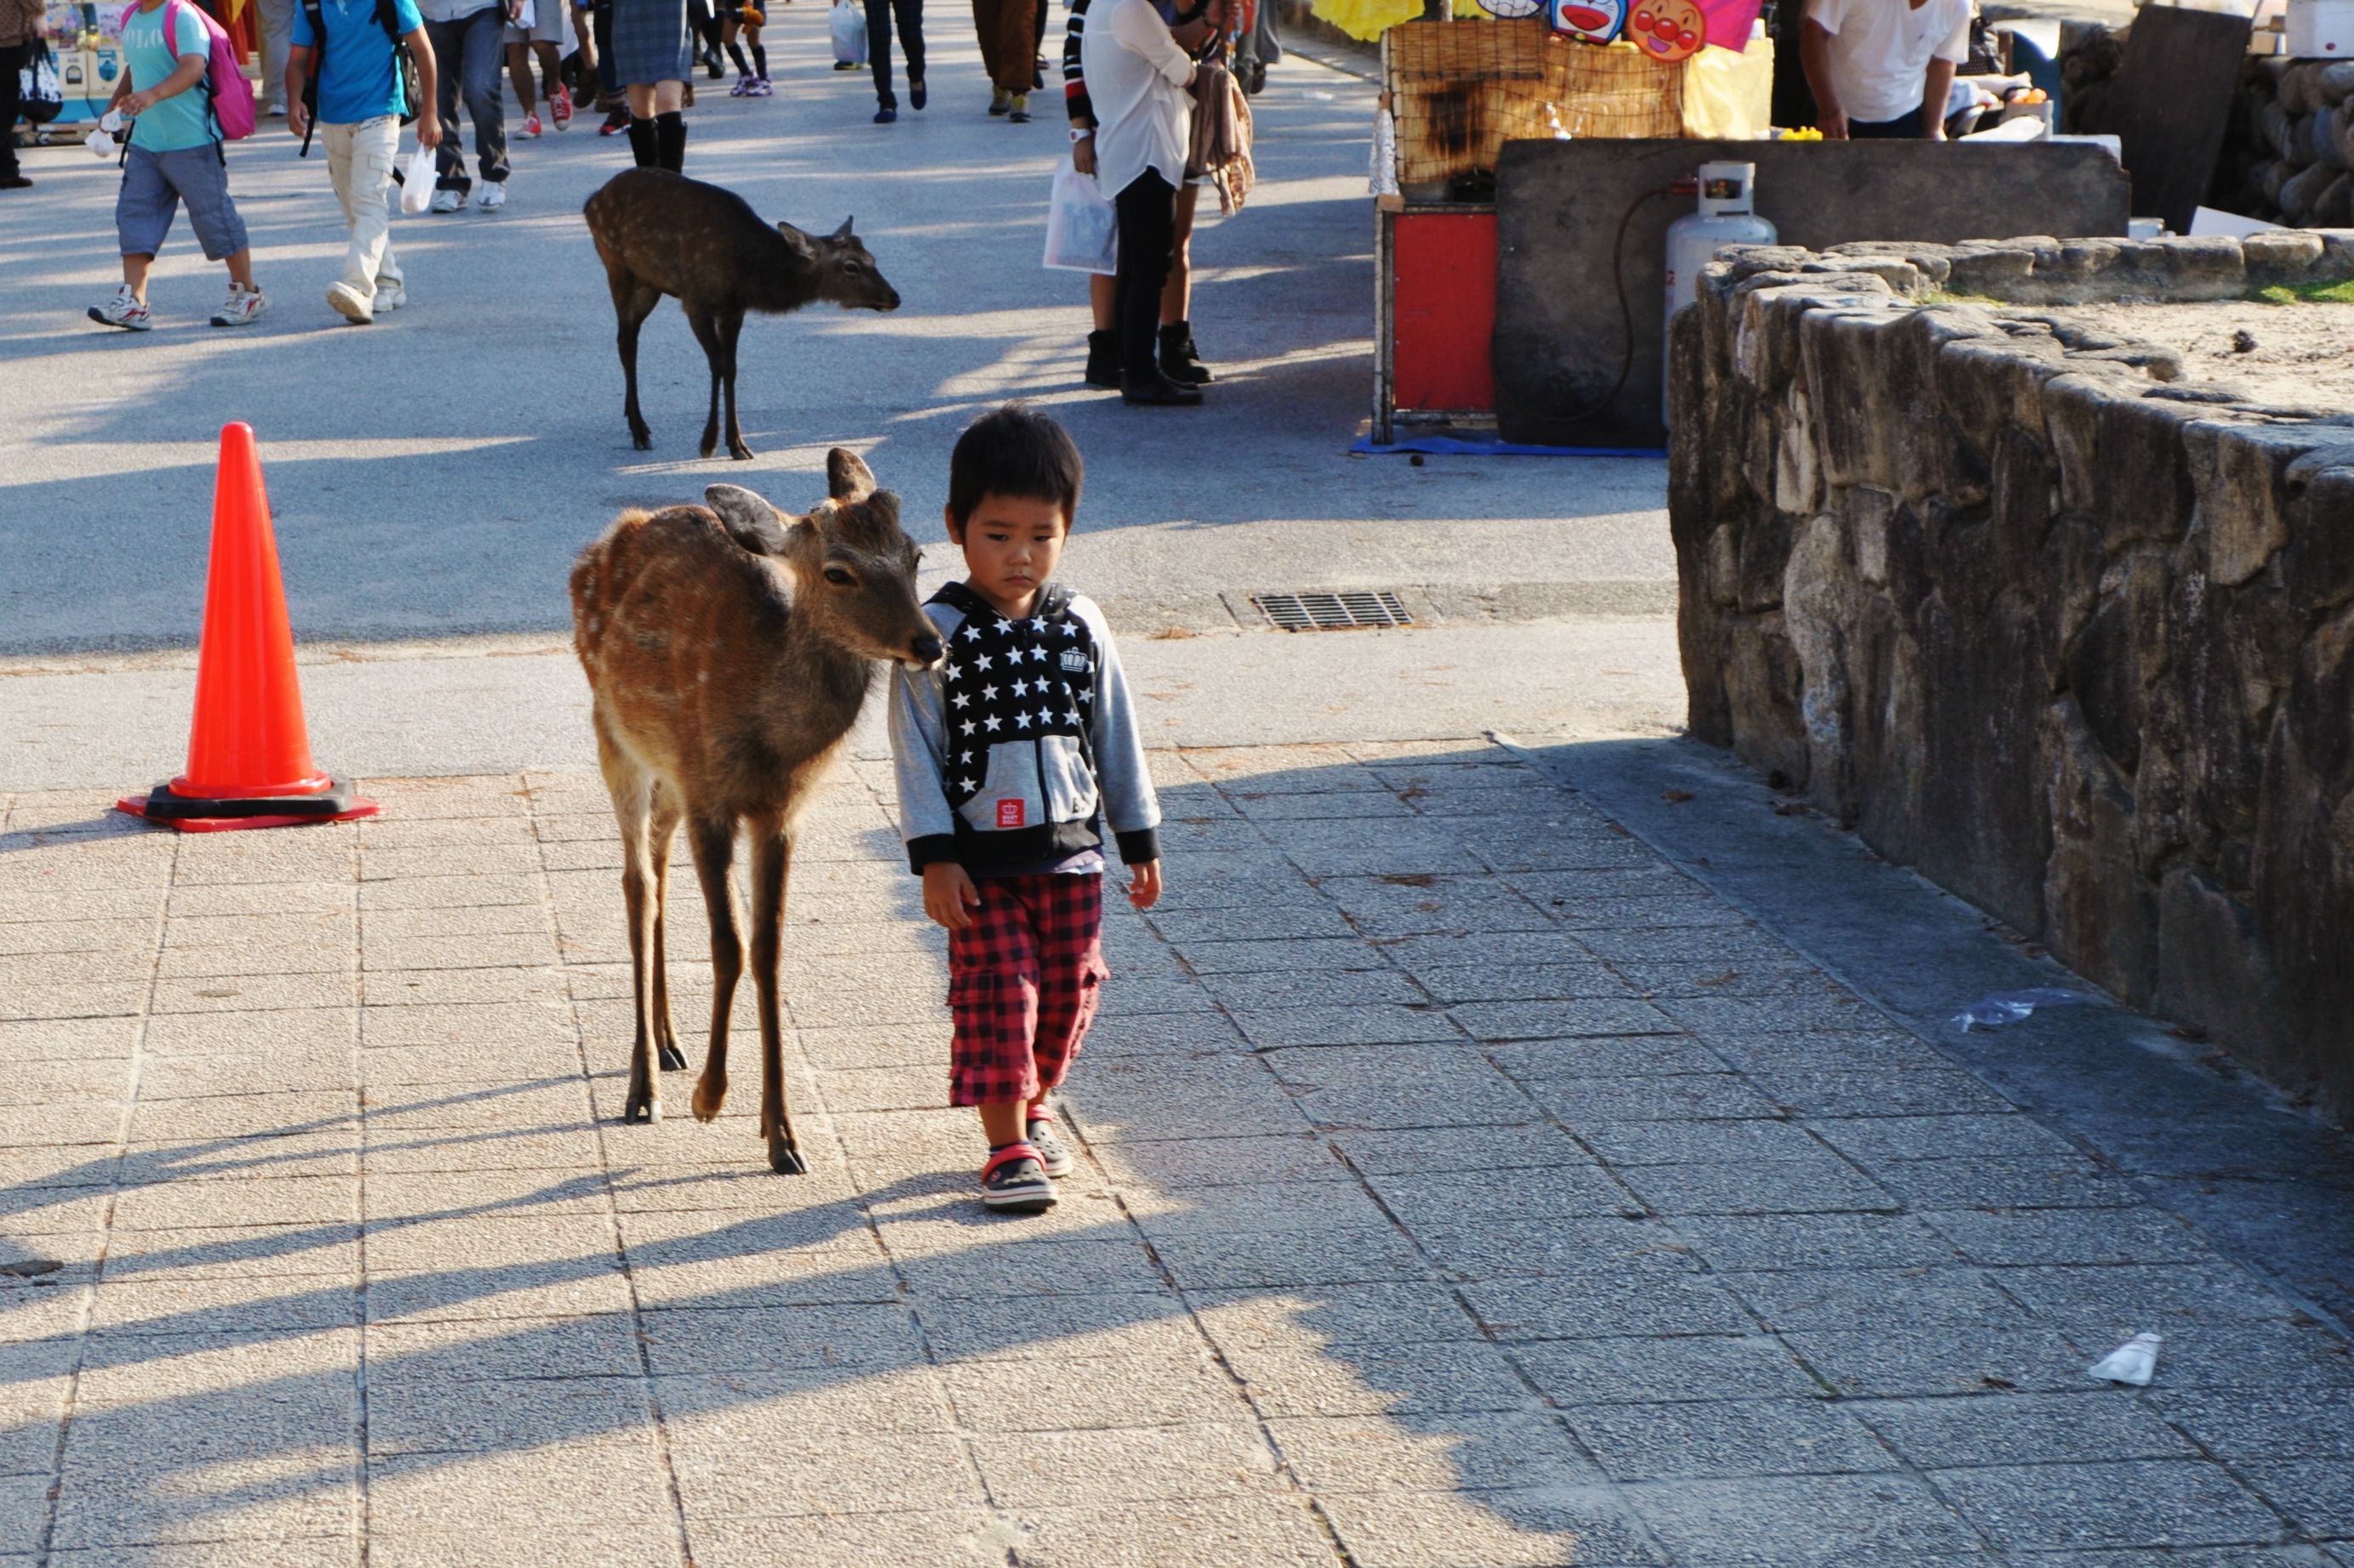 Theres an island in Japan, Miyajima, where deer roam free by the hundreds. This one was silently walking around with this kid for a few hours.